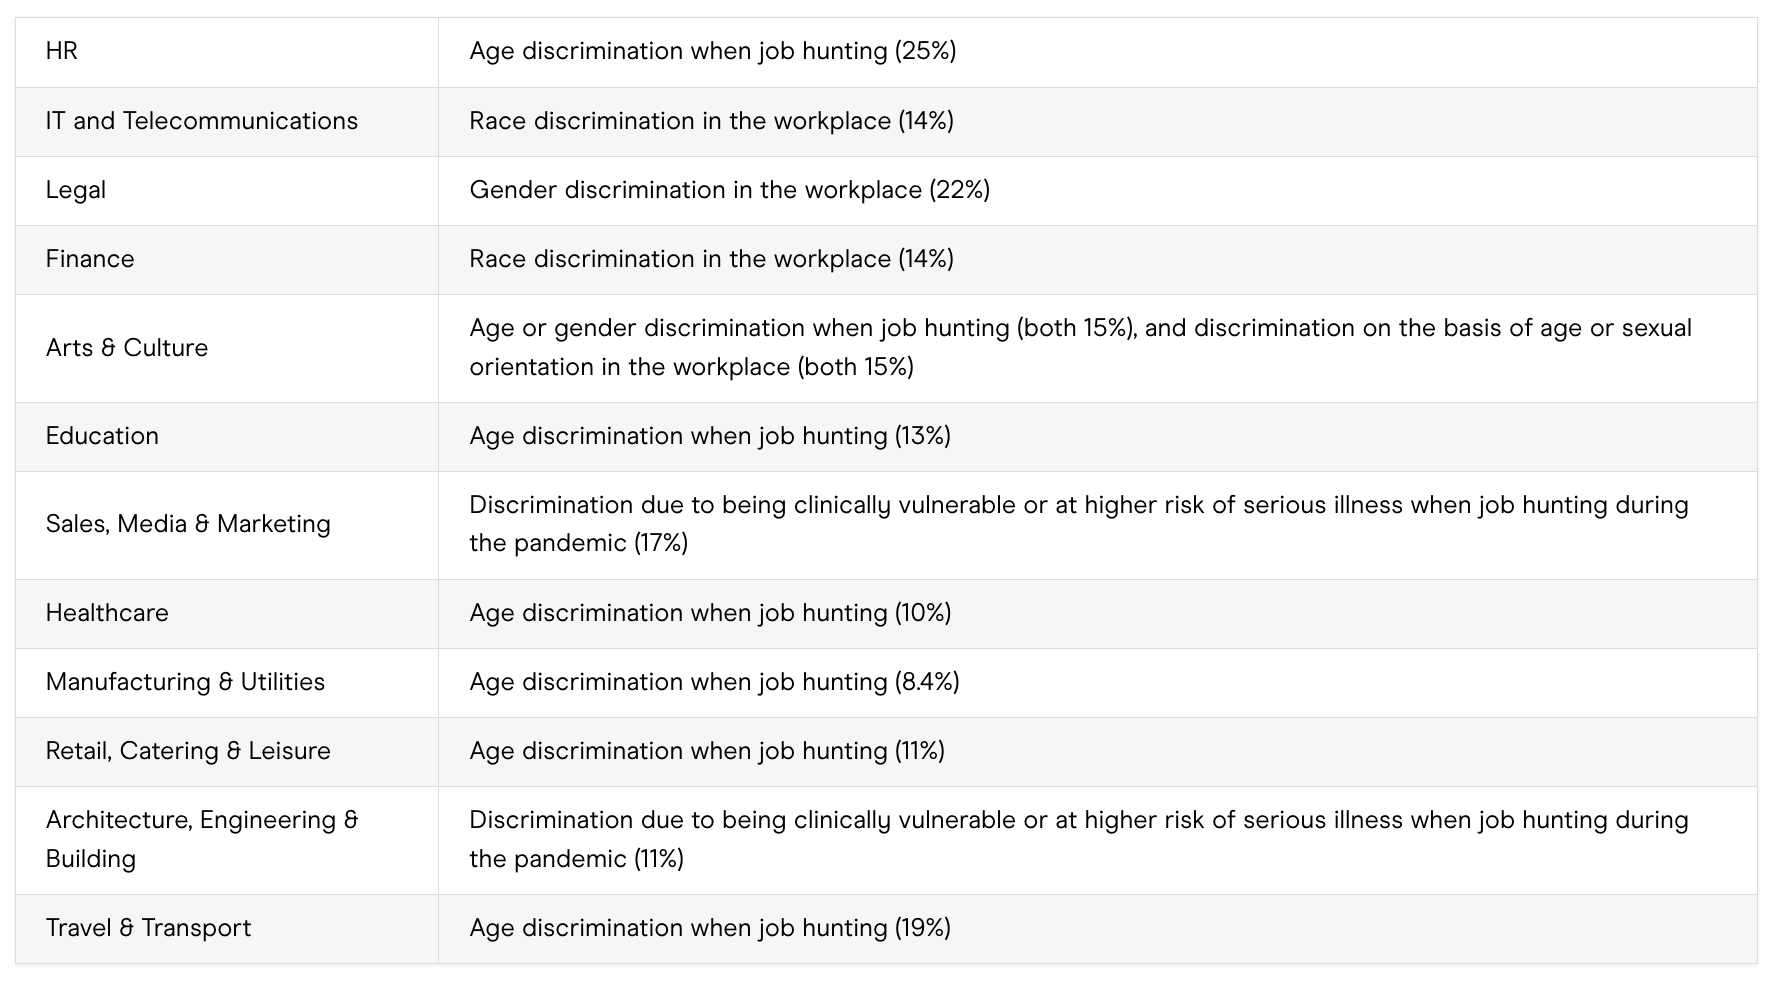 The most common form of work-related discrimination for each industry